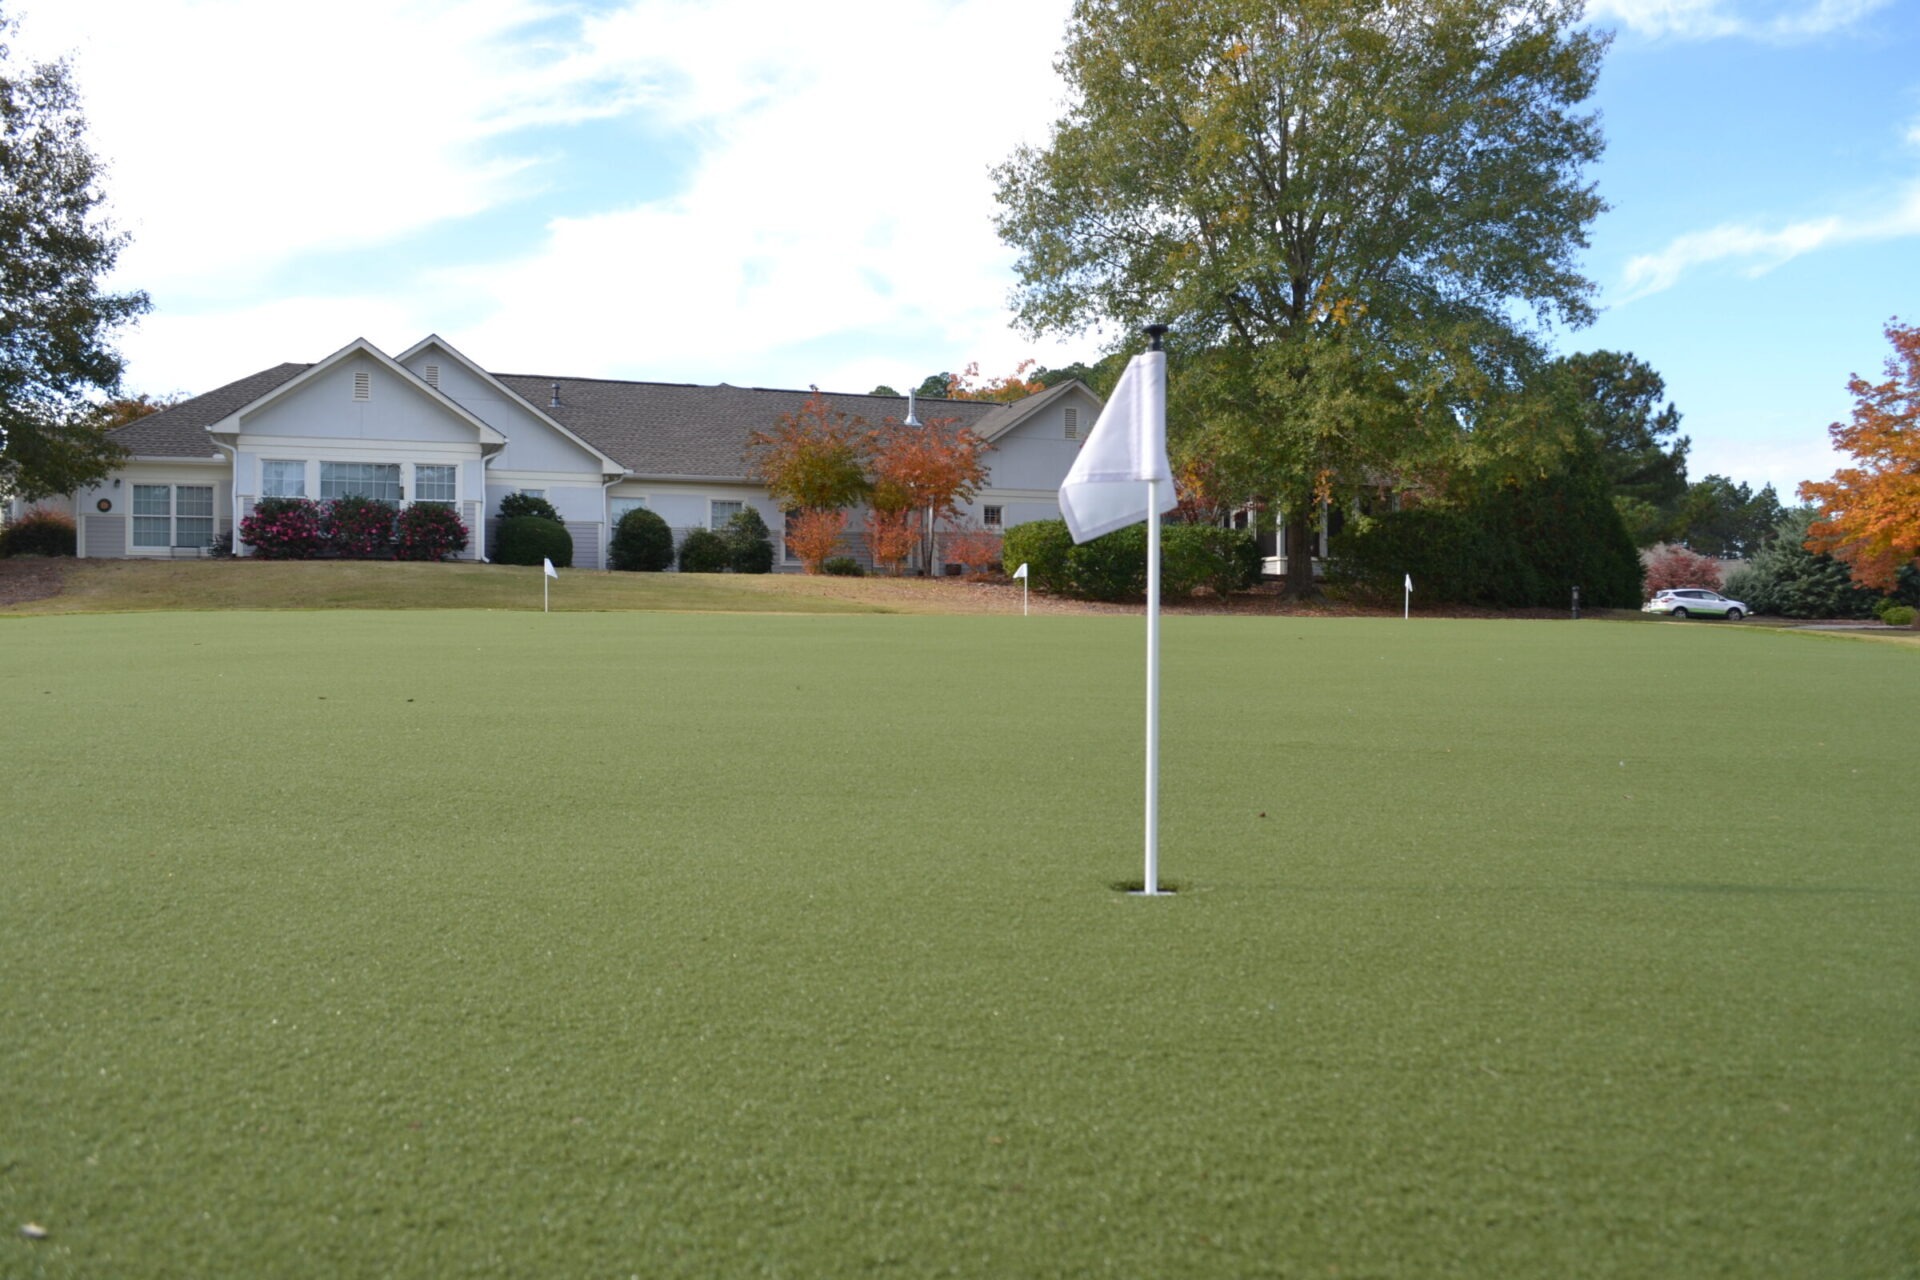 This is a photo of a golf green with a white flag in the hole, a background with a house, trees exhibiting autumn colors, and a car.